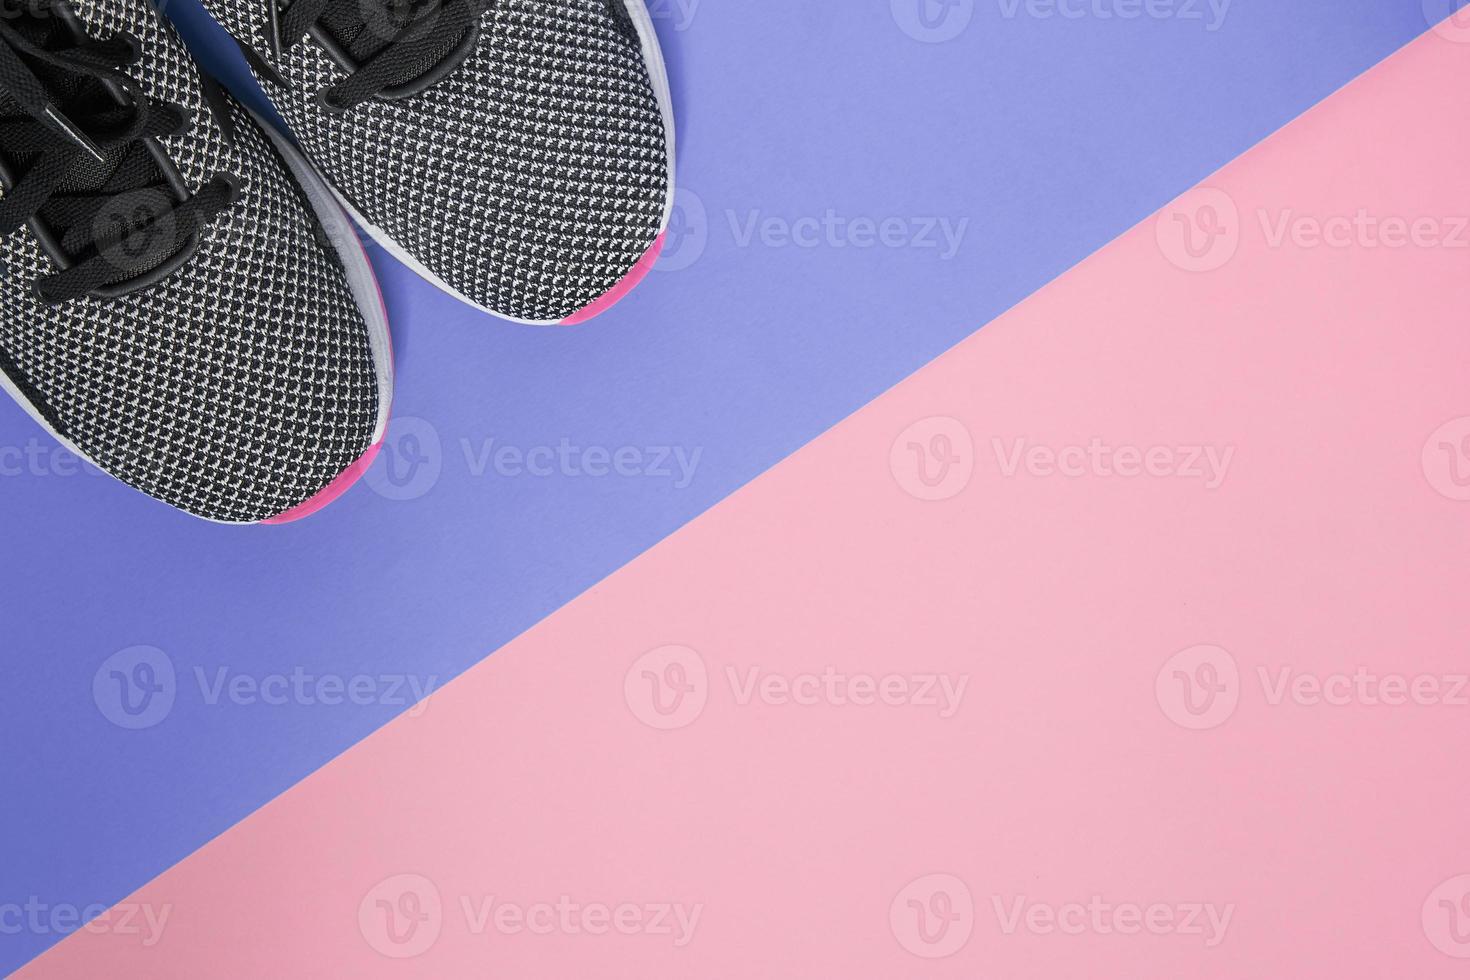 Black and white sneakers with pink sole on ultra violet and pink background. Concept of healthy lifestile and everyday training. Top view with copy space for your project photo